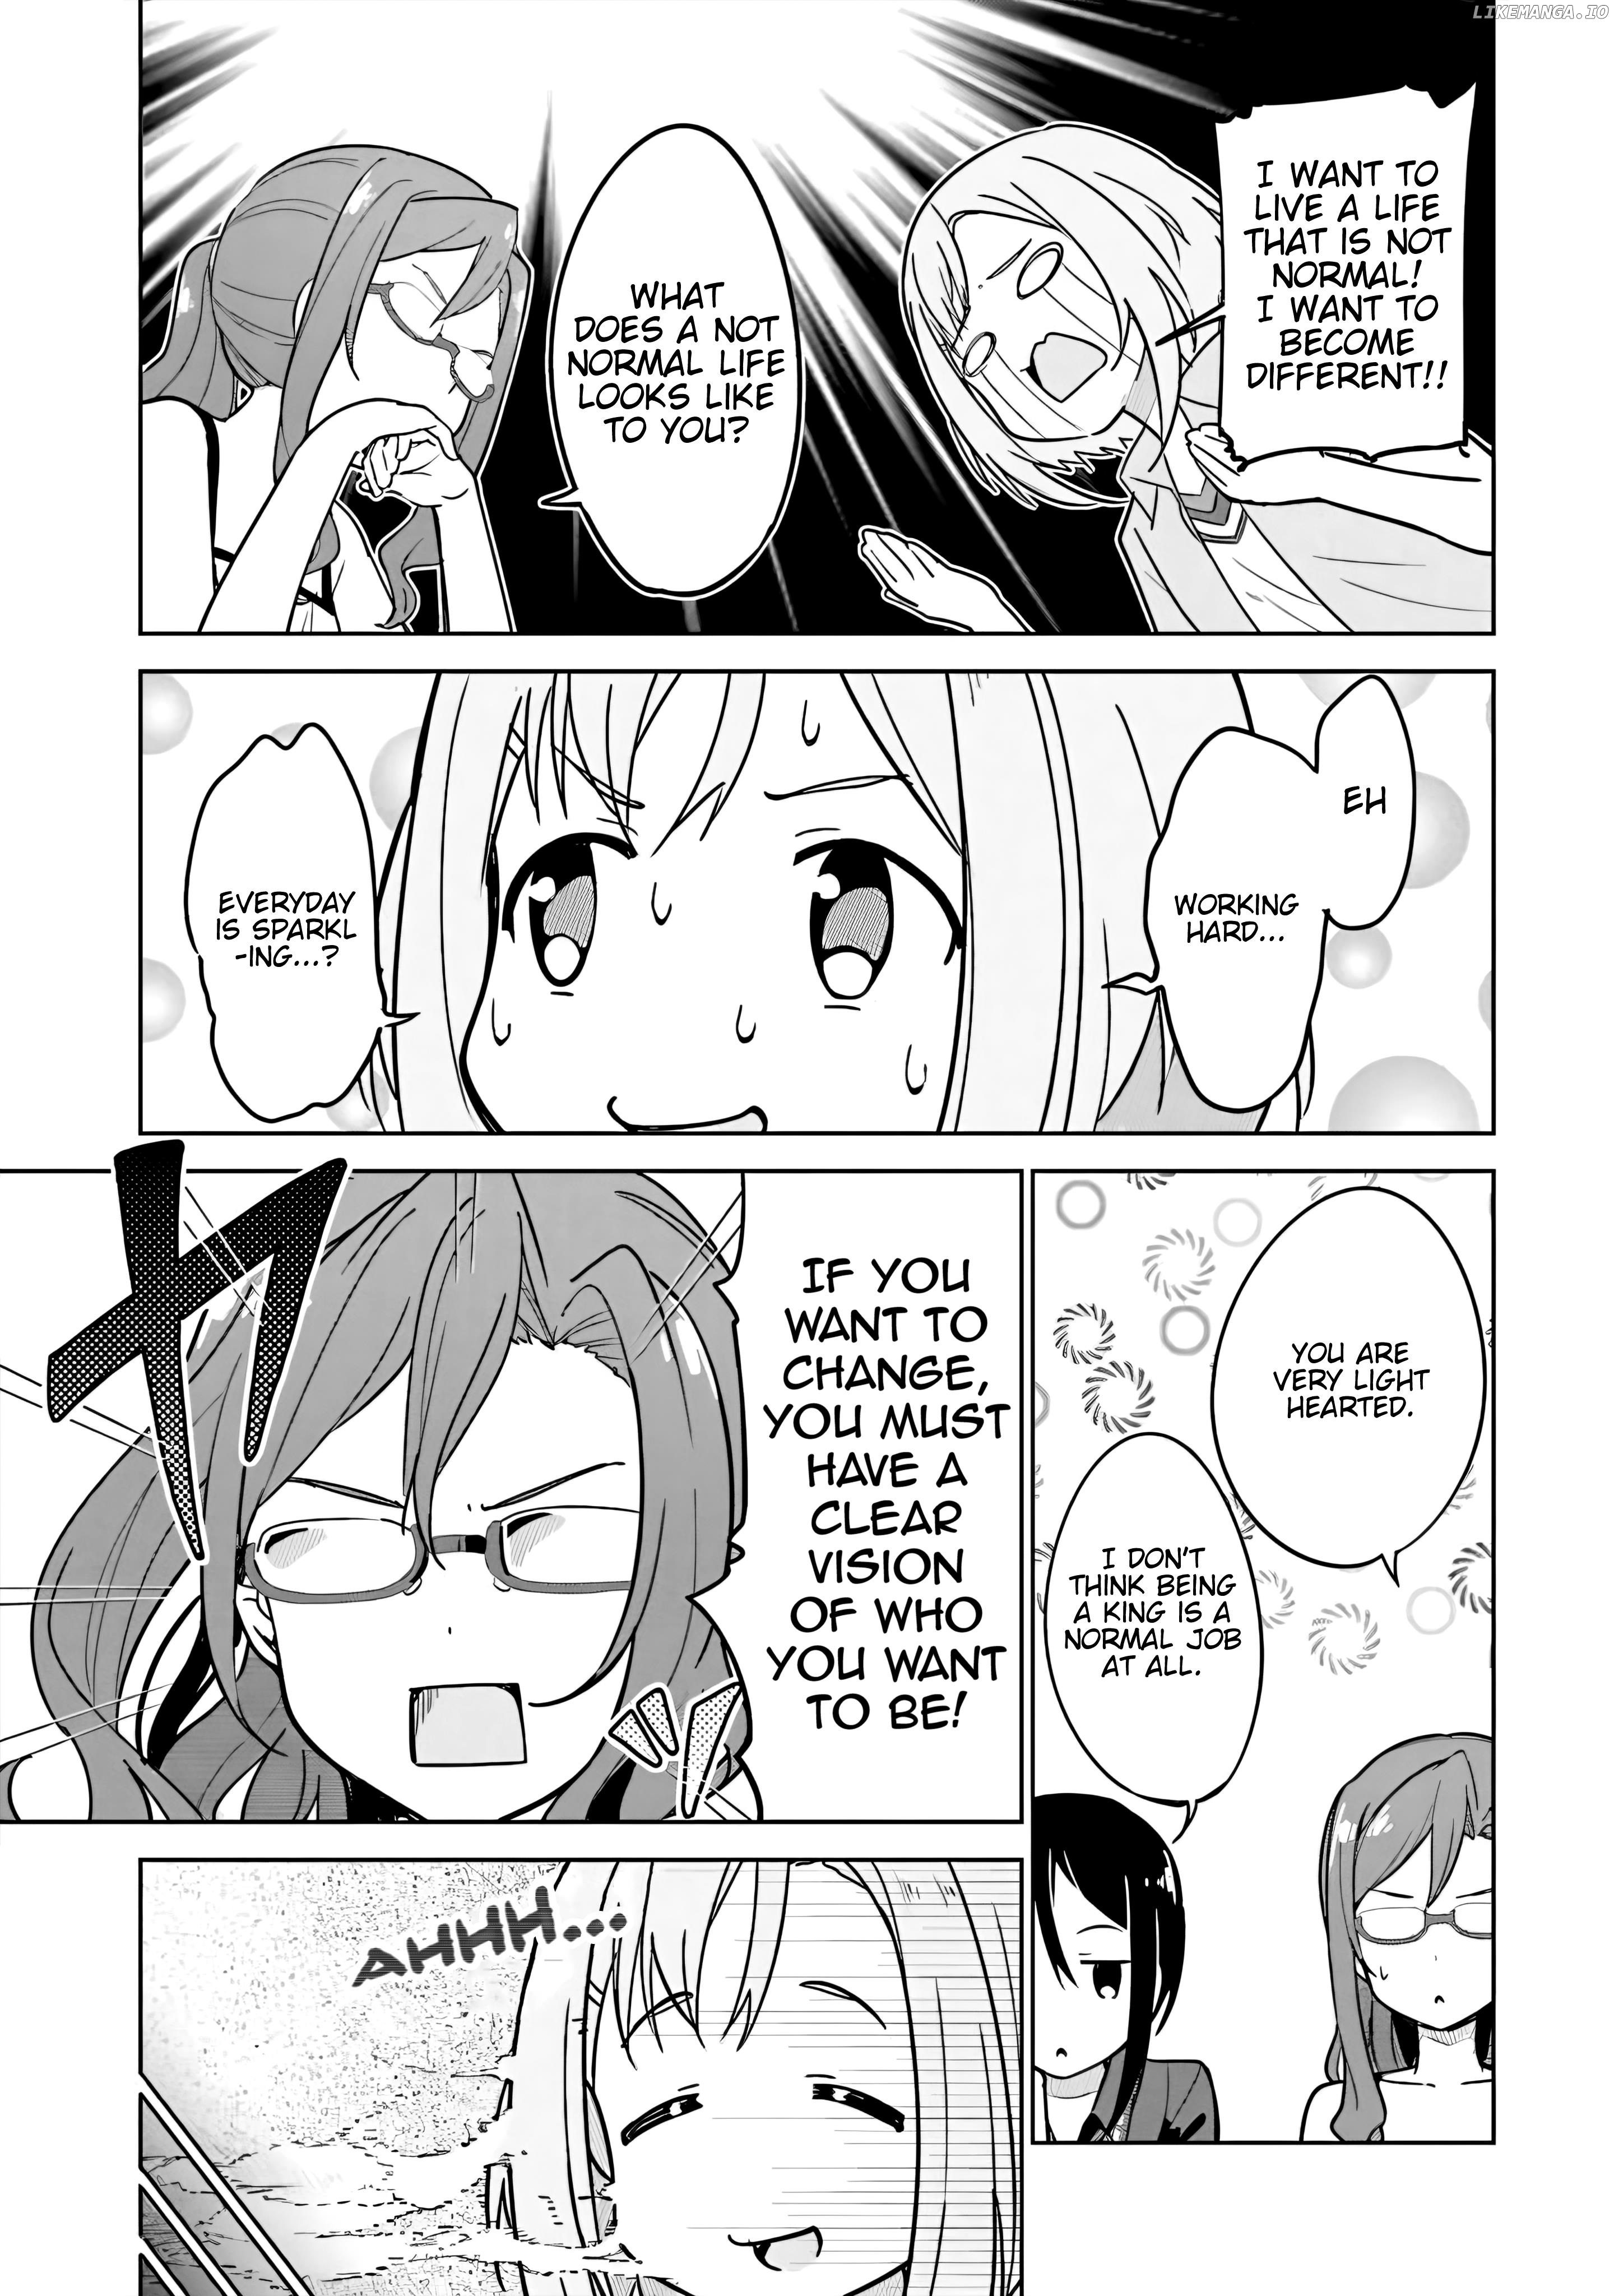 Sakura Quest Side Story: Ririko Oribe's Daily Report Vol 1 chapter 6 - page 5